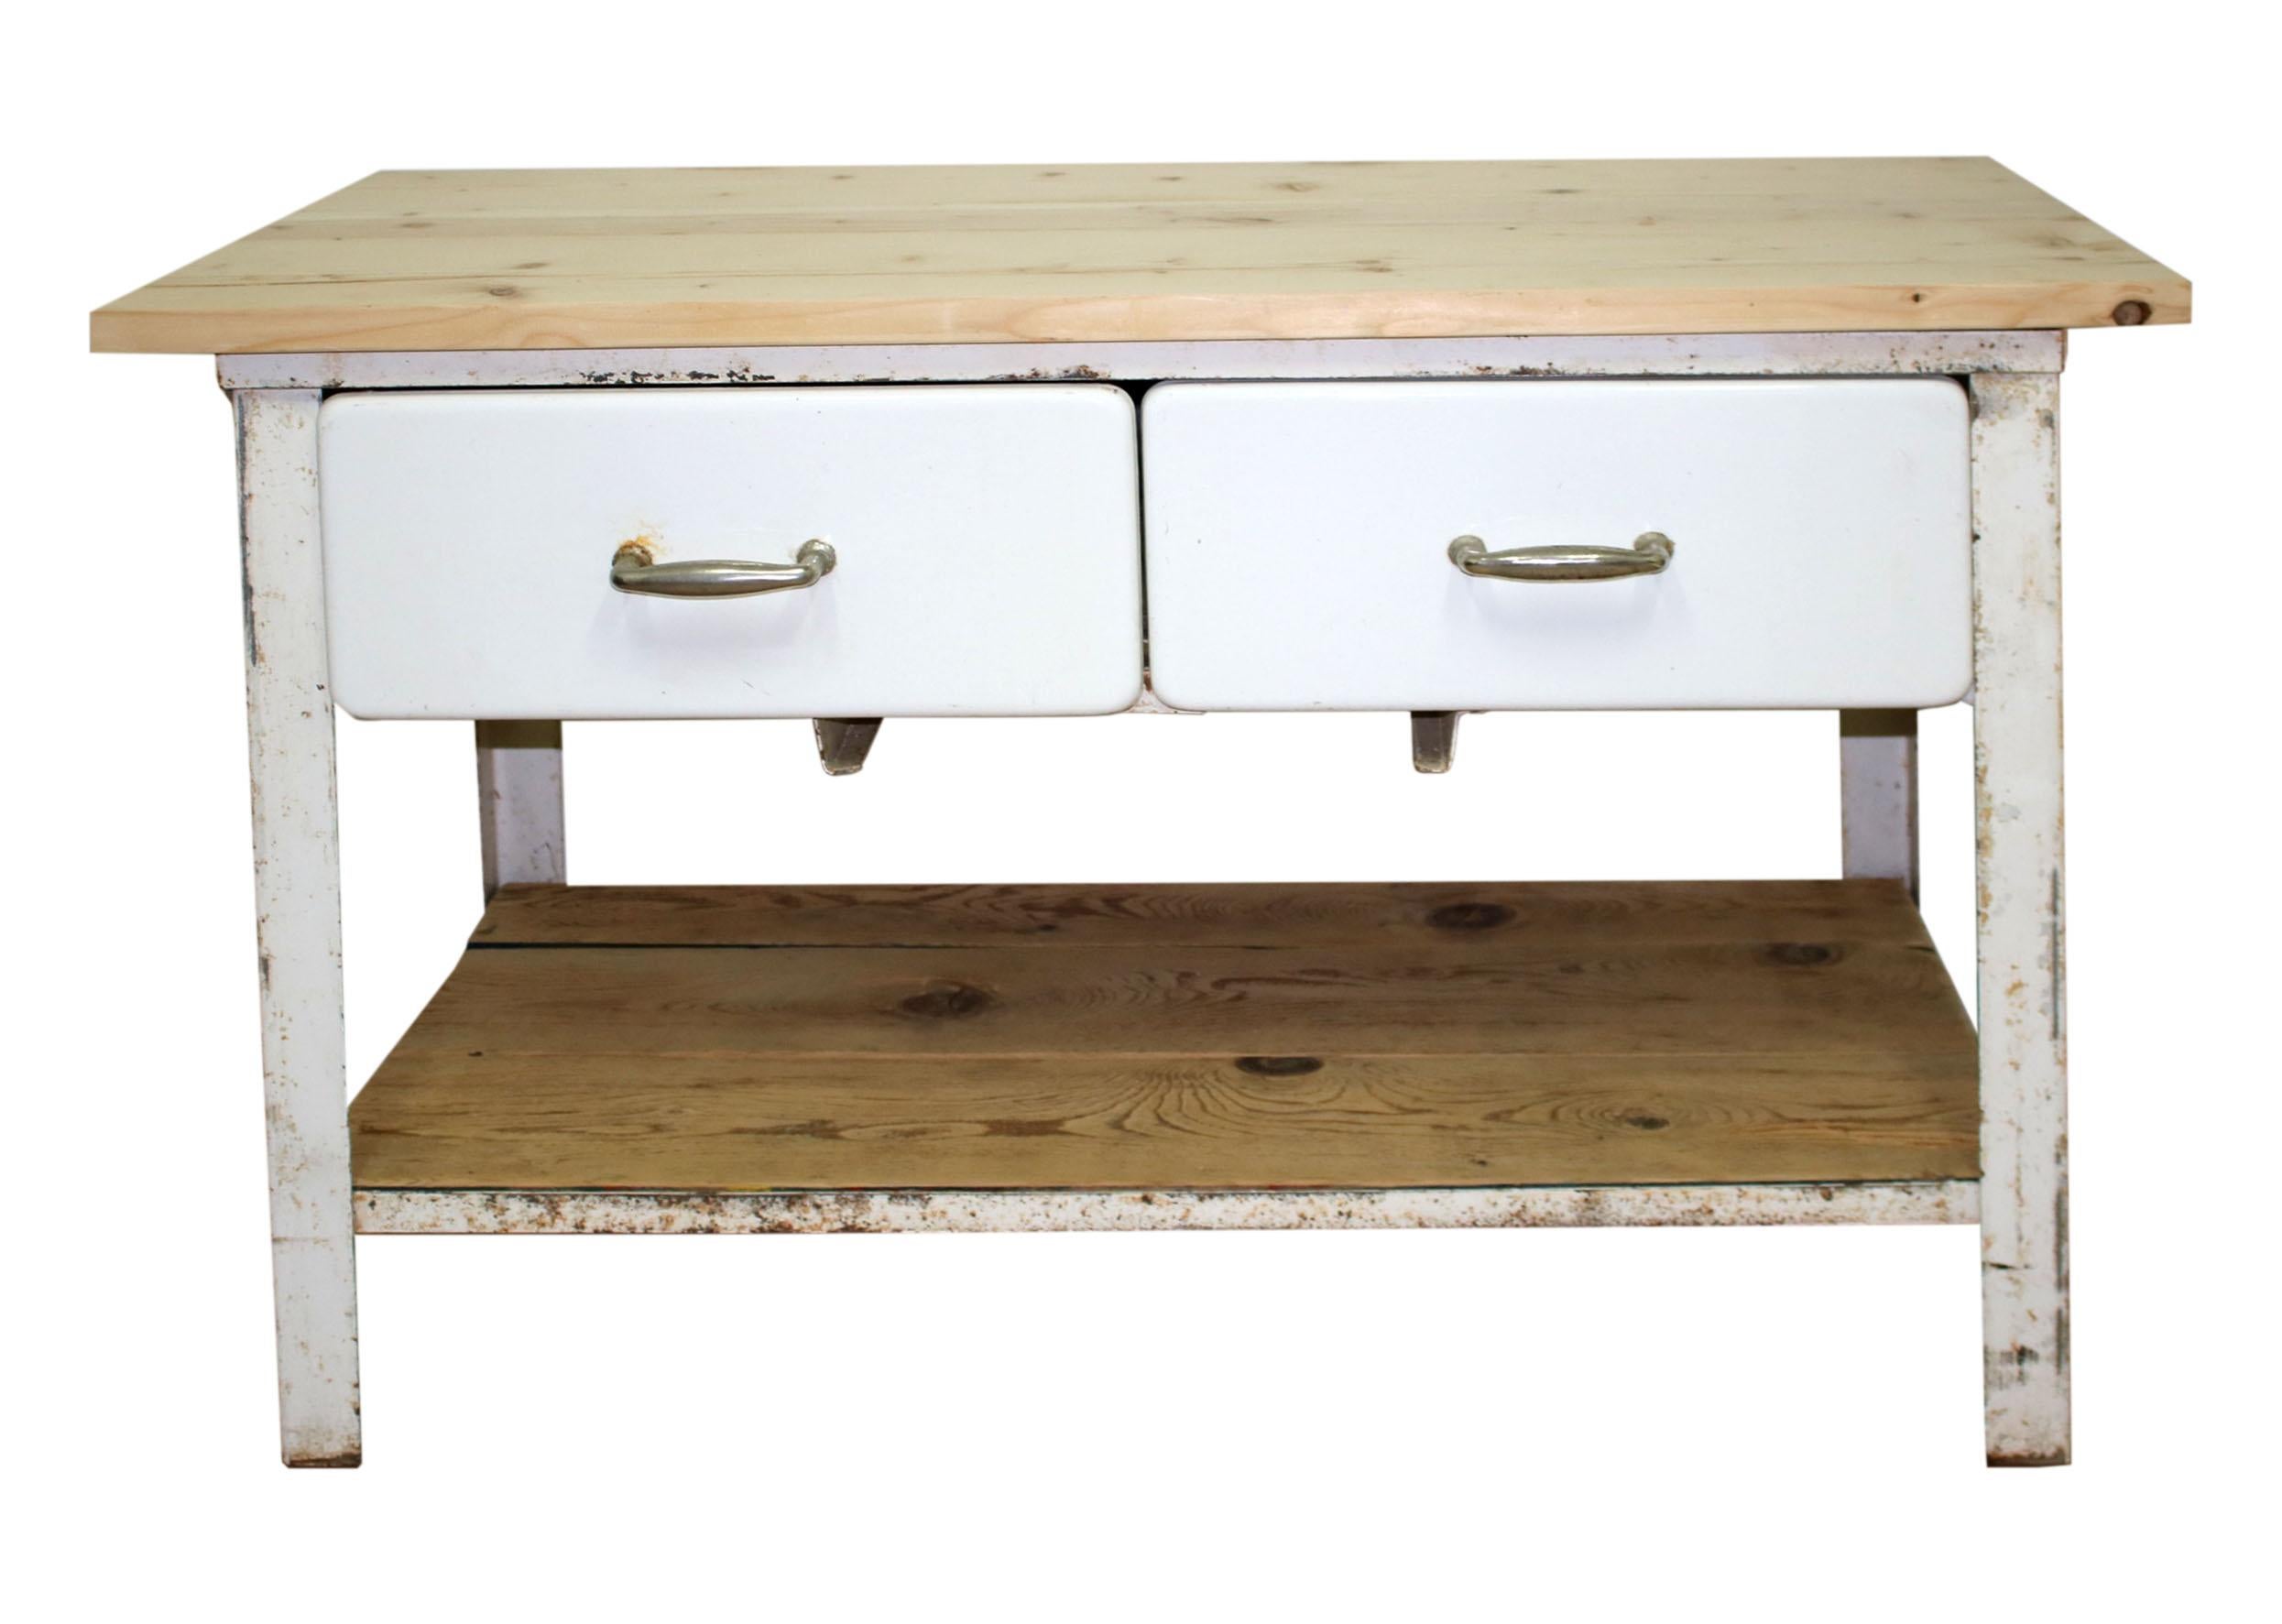 This kitchen work table mirrors the design of the period in which it was produced. It provides ample storage for kitchen tools and utensils. The wooden worktop provides a very comfortable space for kitchen staff. The drawerd are enameled with white